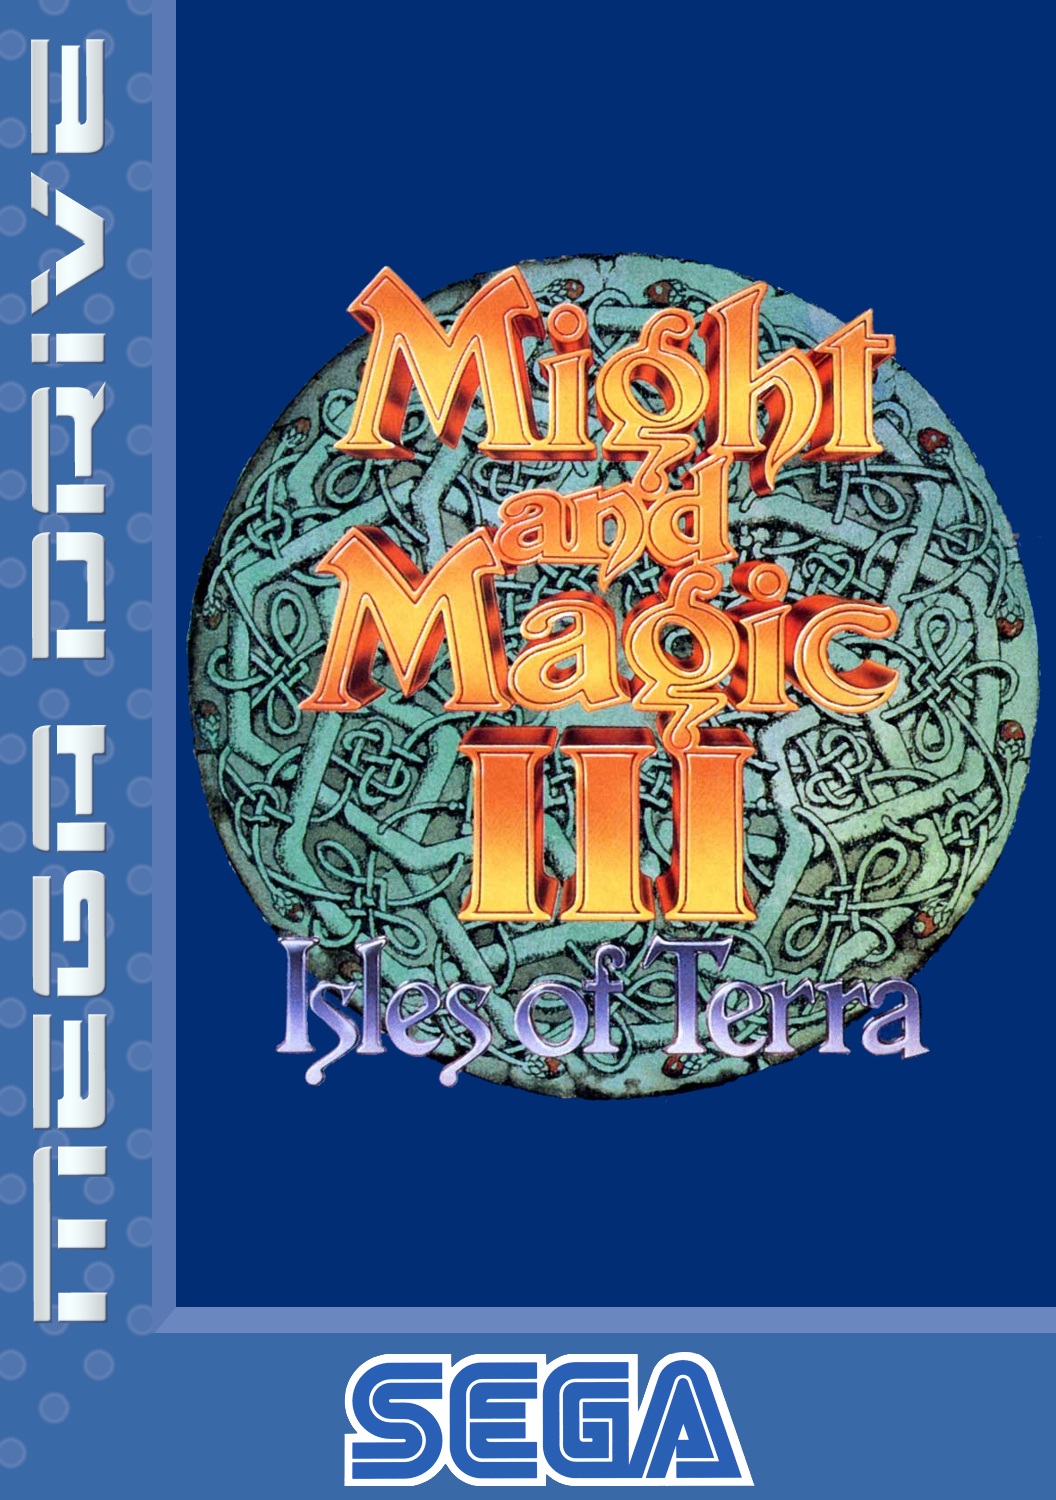 download might and magic 3 isles of terra